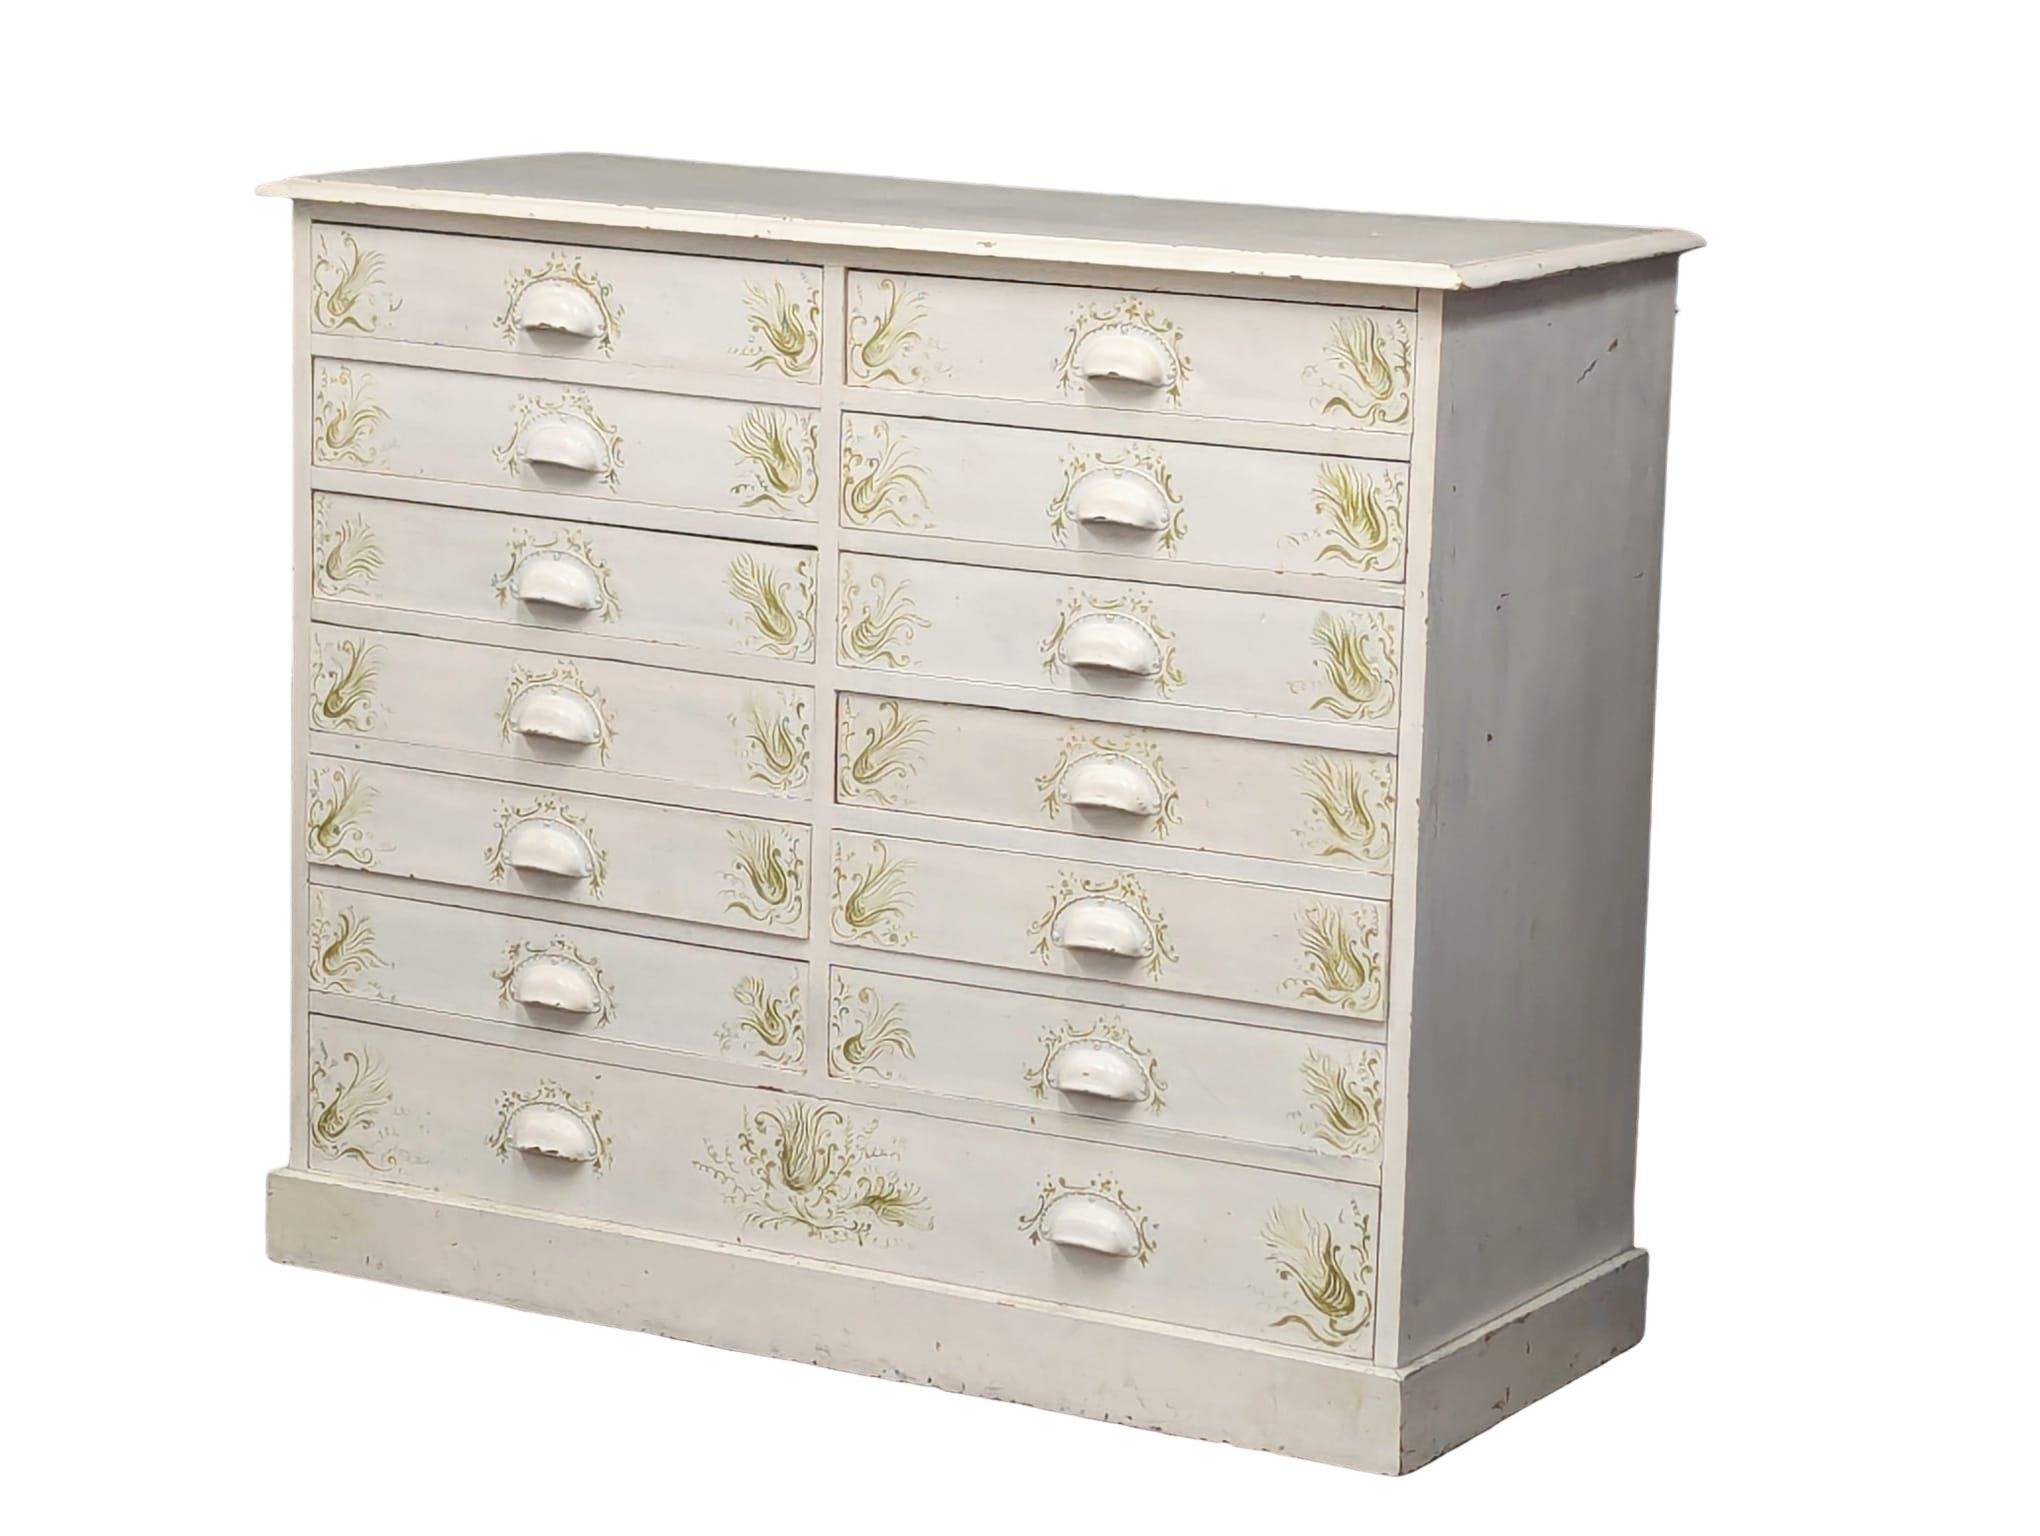 A large Late 19th Century painted pine multi drawer chest. Circa 1900. 122x50x102cm